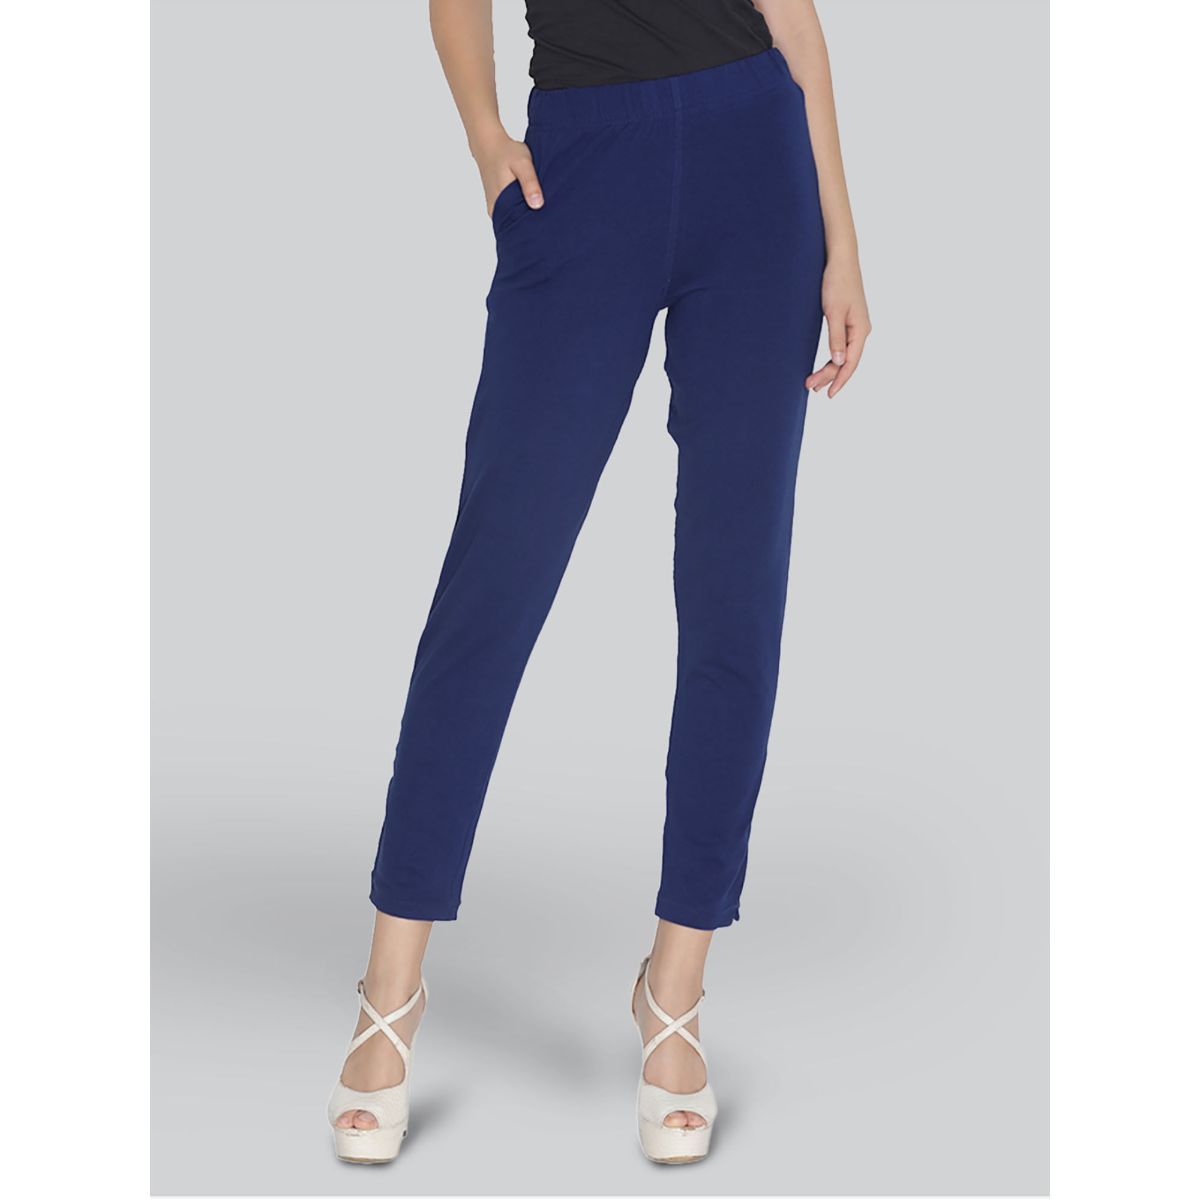 Daily Sports Magic Woman's High Water Pants - Navy - Fore Ladies - Golf  Dresses and Clothes, Tennis Skirts and Outfits, and Fashionable Activewear